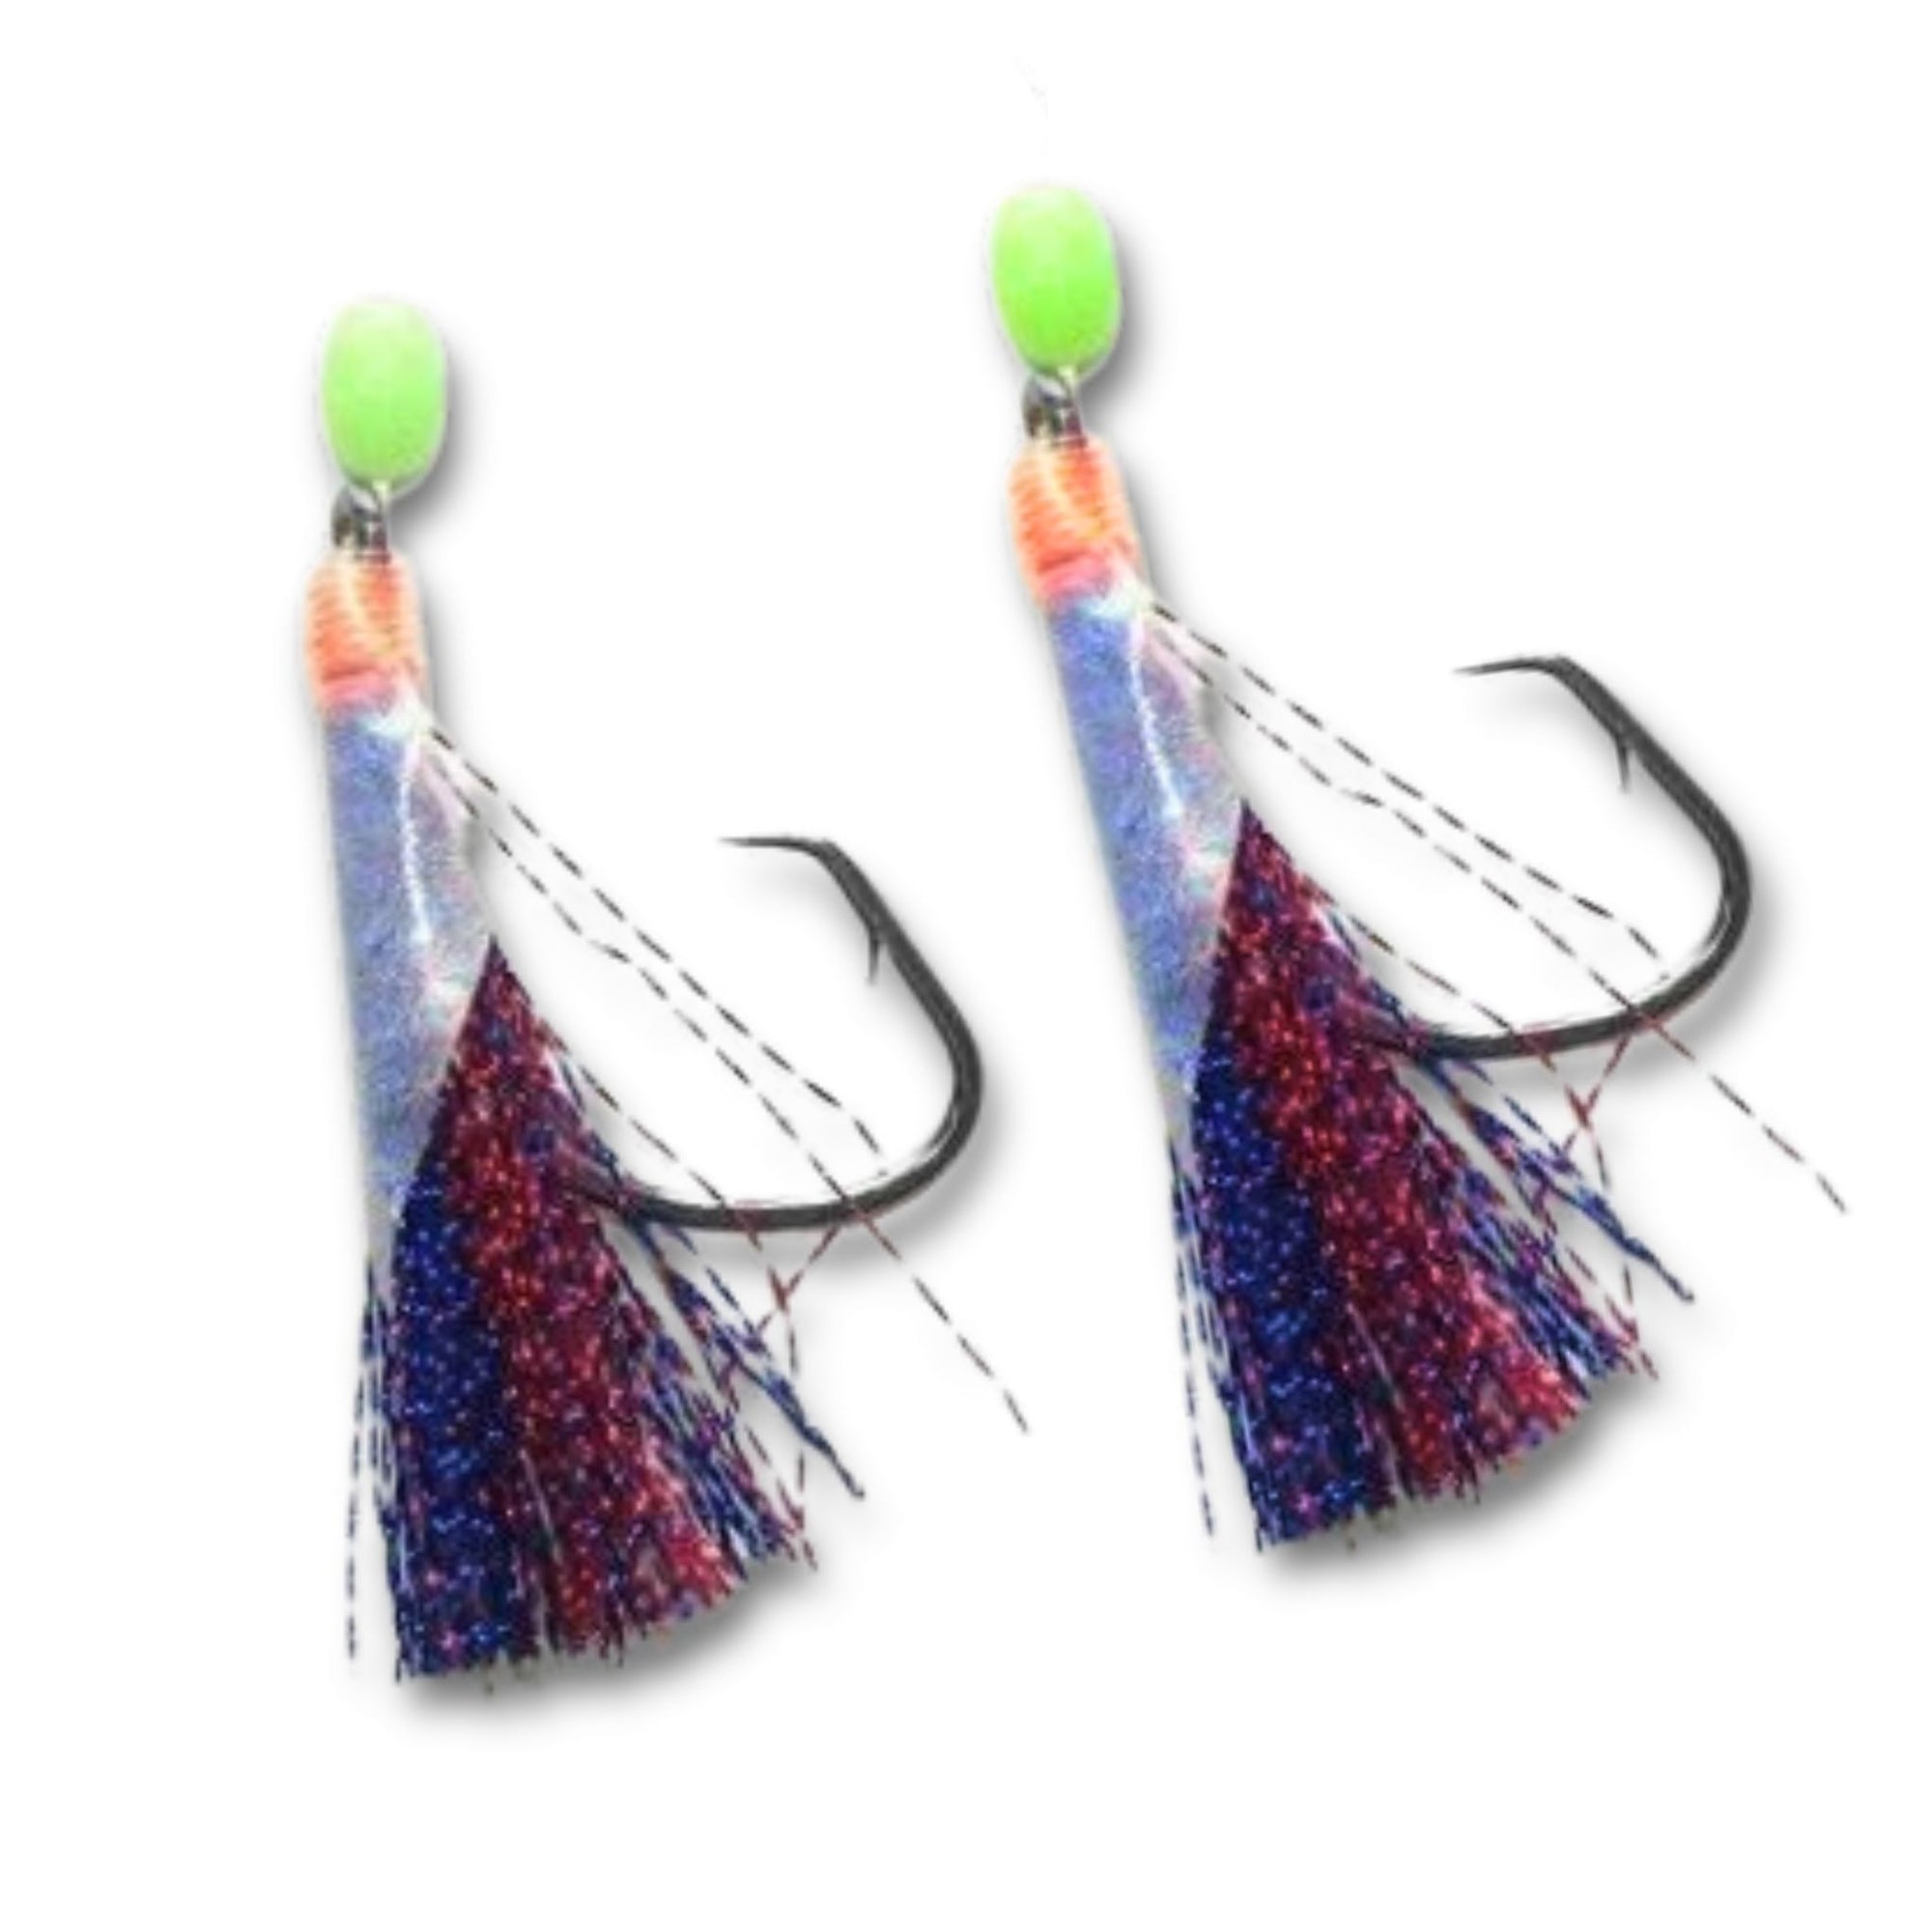 Snapper Mates Premade Paternoster Rig - 1/0 Red/Blue 2 Rigs - South East Clearance Centre